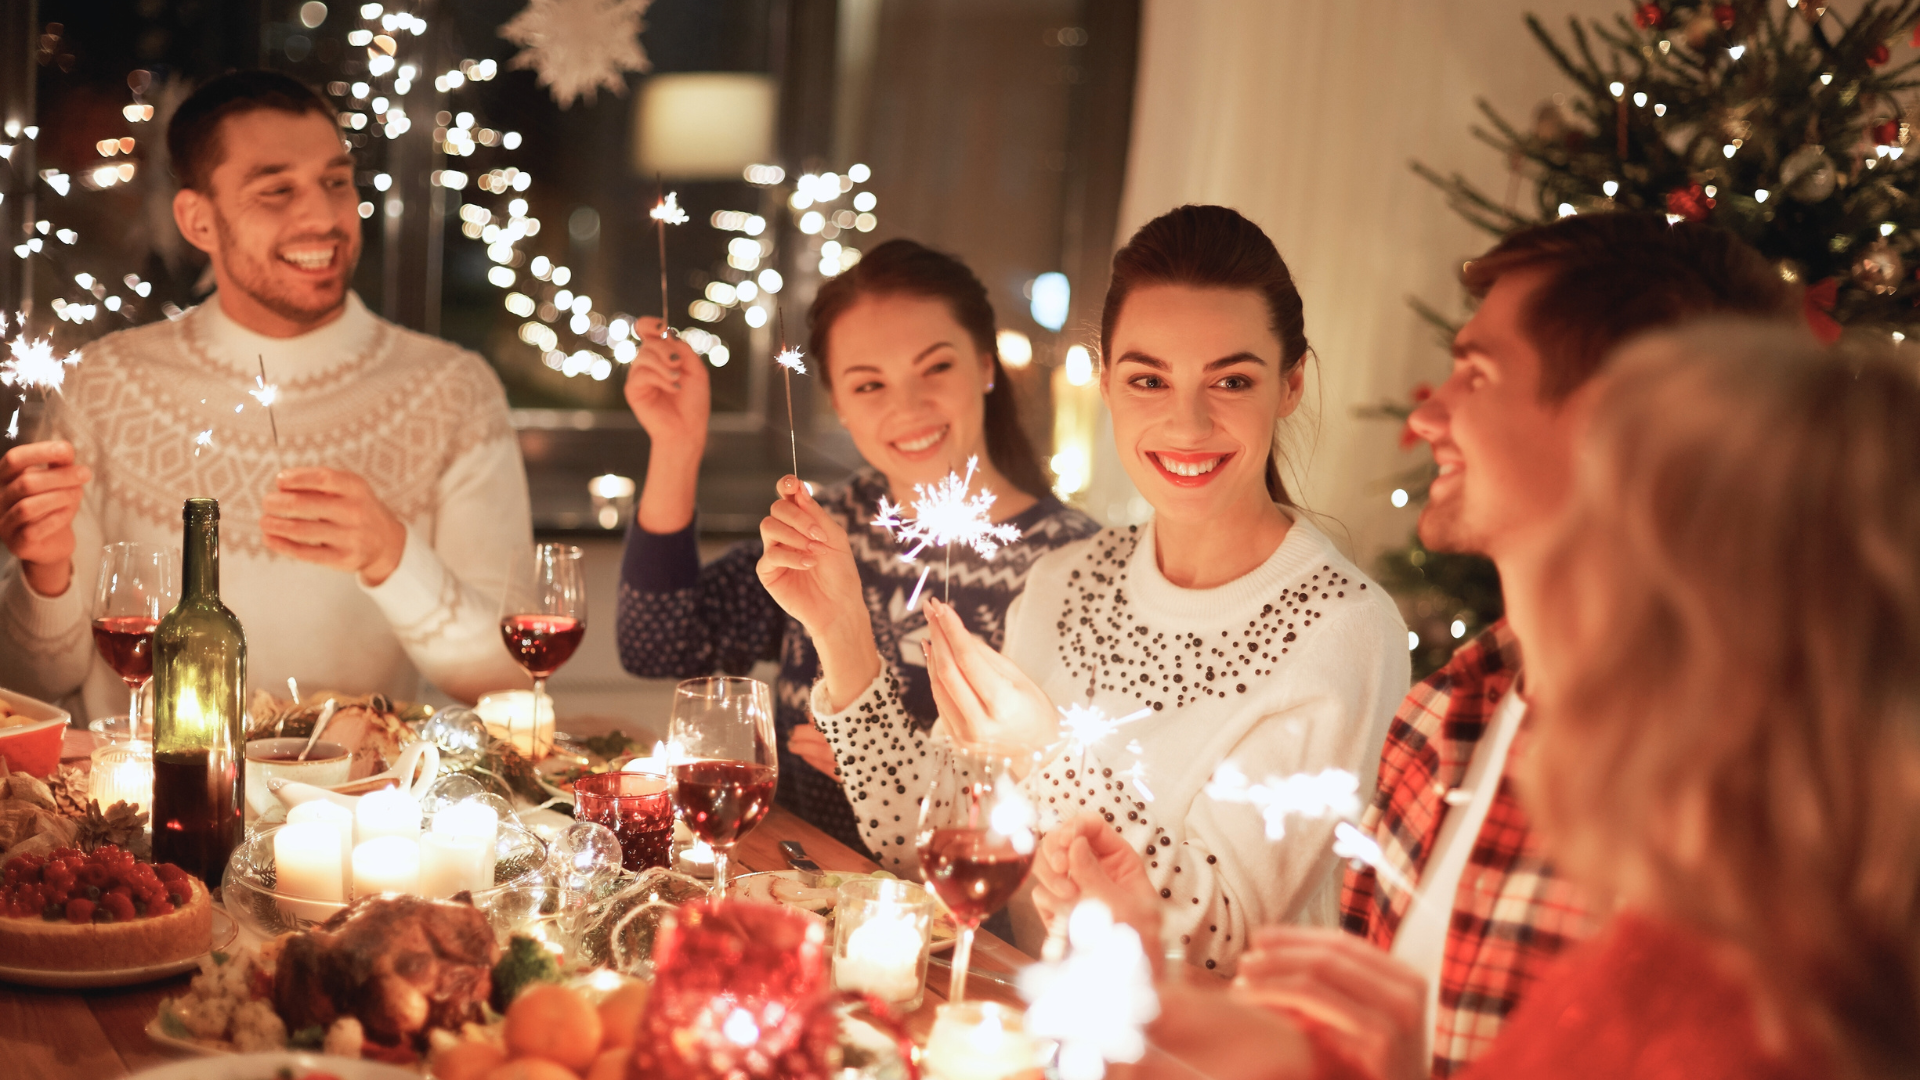 How to Look After Your Well-being During the Holiday Season